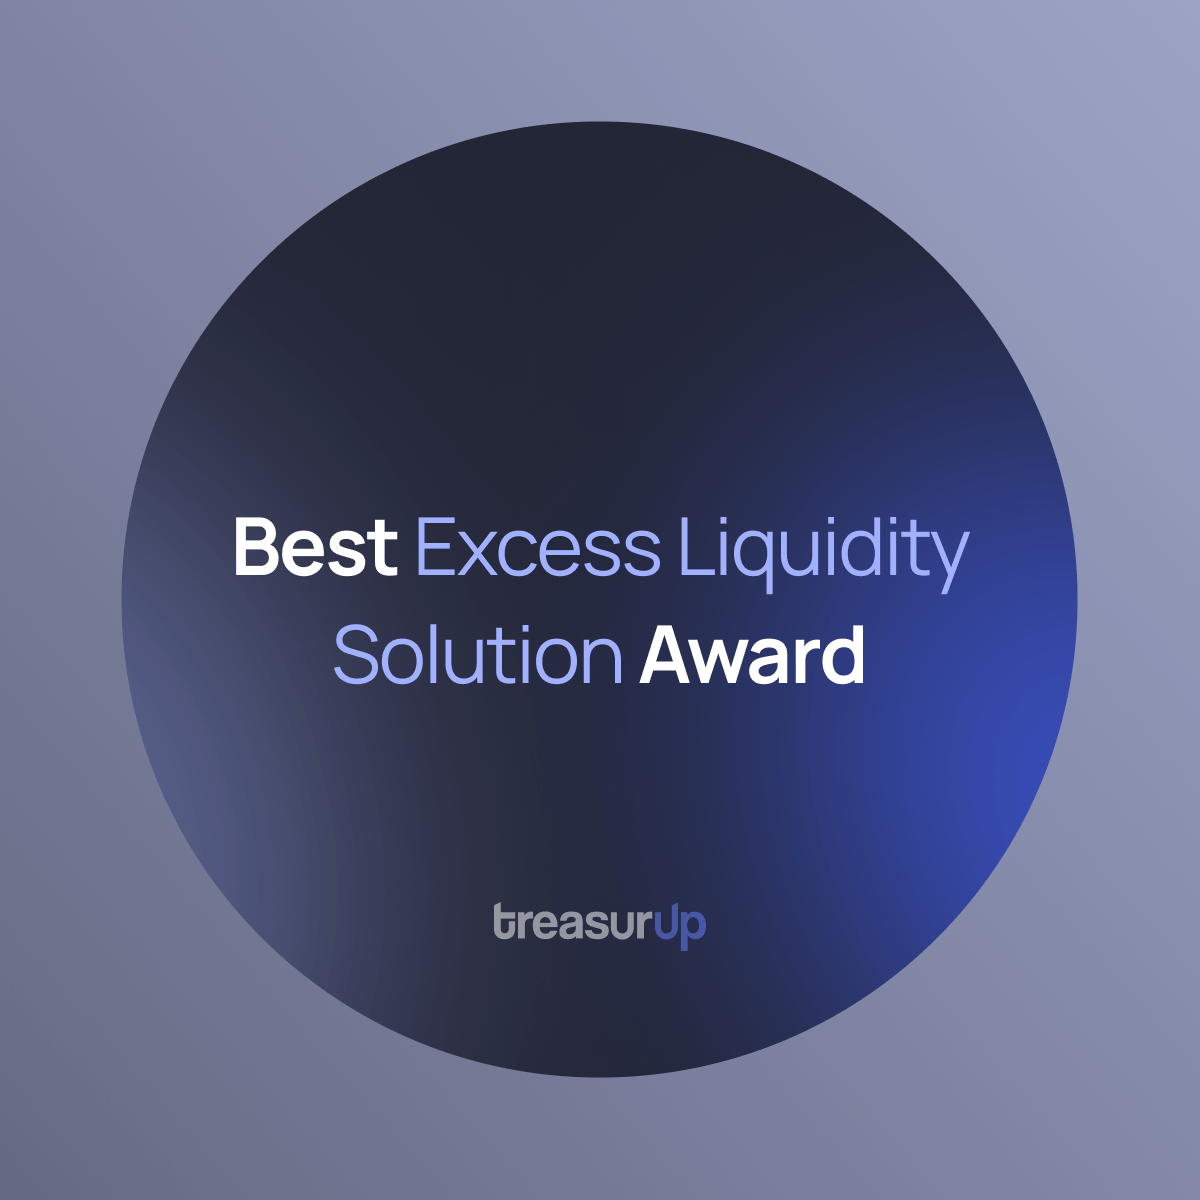 TreasurUp receiving the Best Excess Liquidity Solution Award from Global Finance